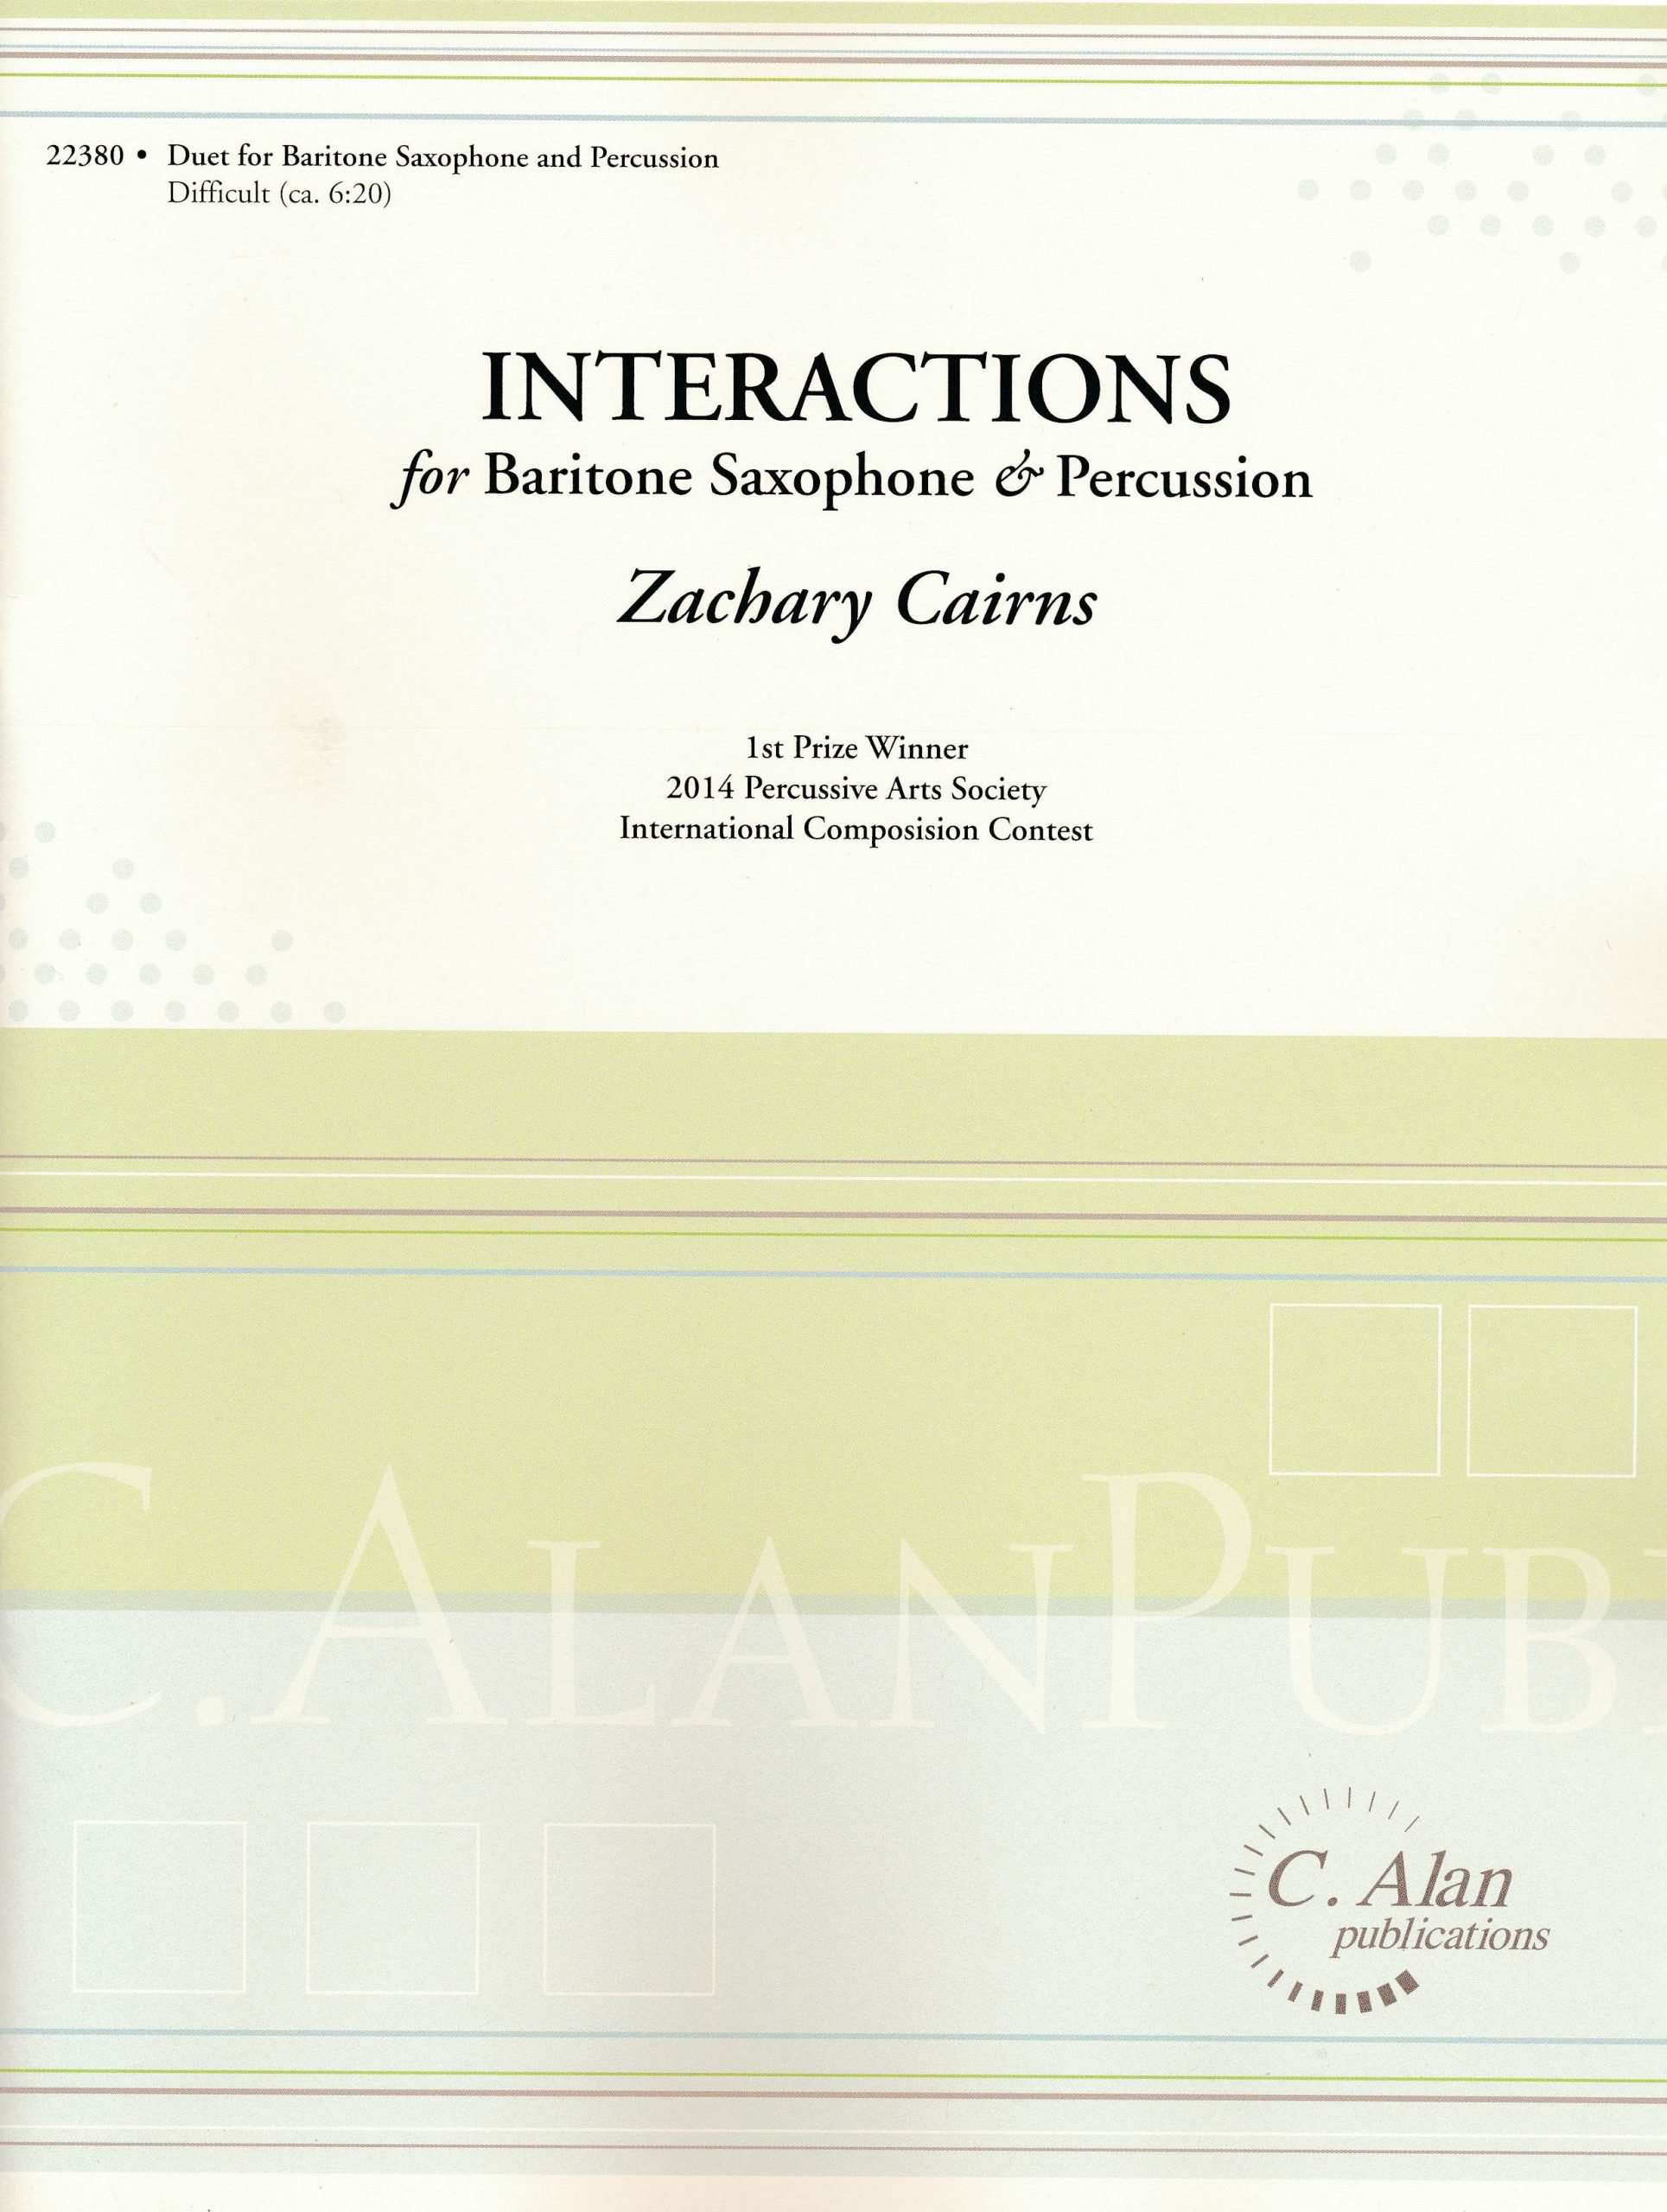 Interactions for Baritone Saxophone & Percussion by Zachary Cairns